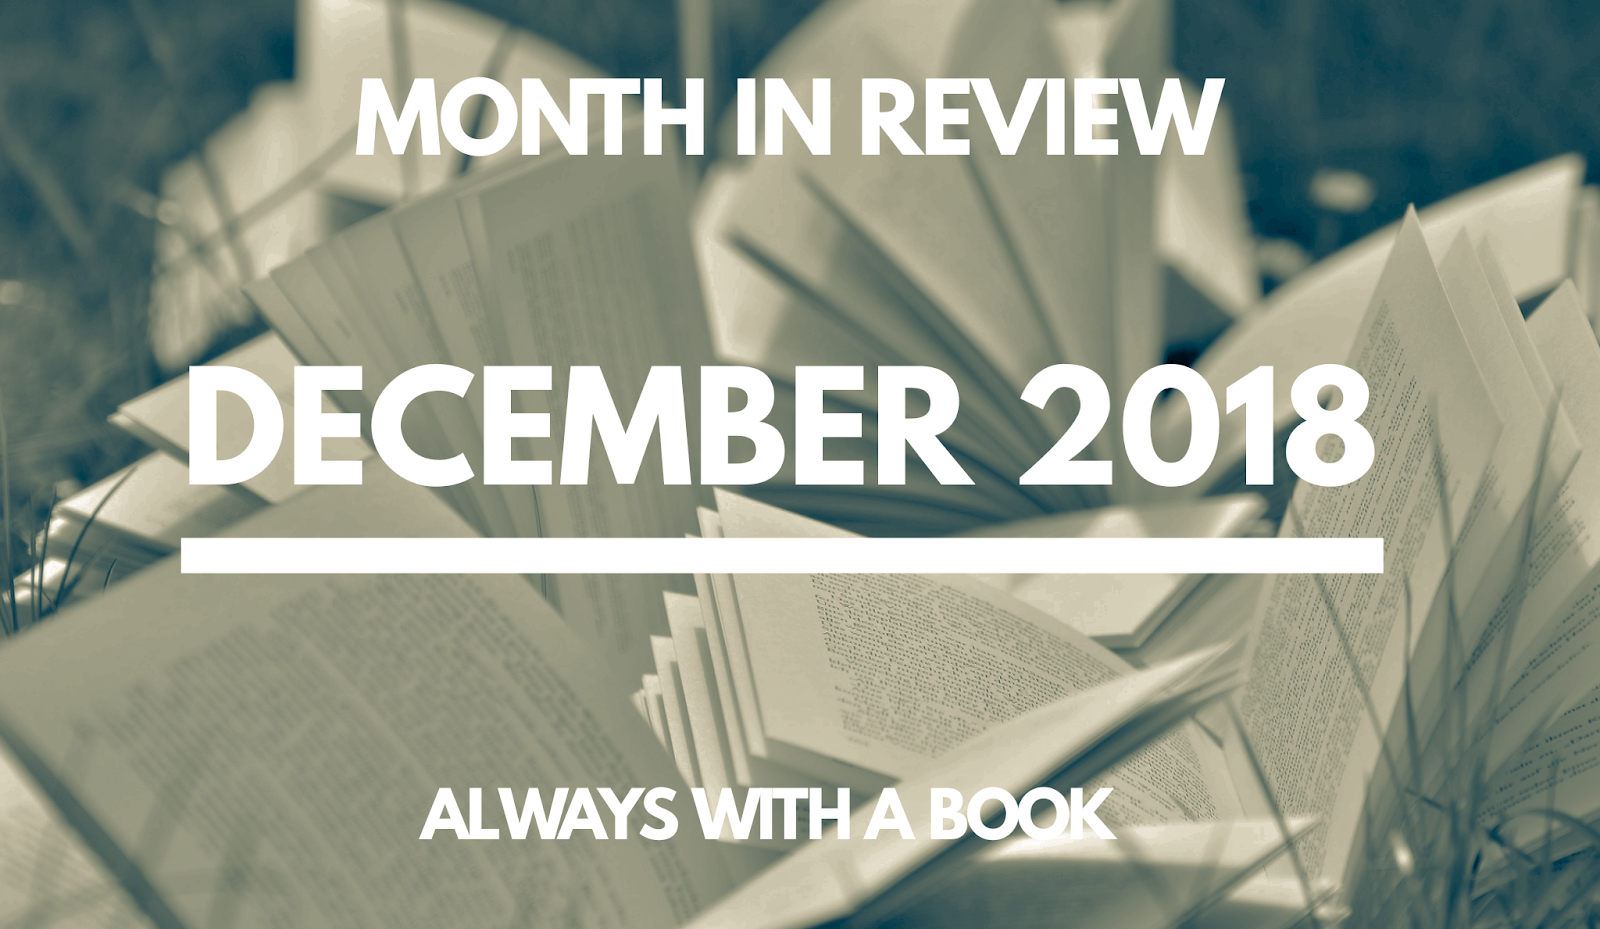 Month in Review: December 2018